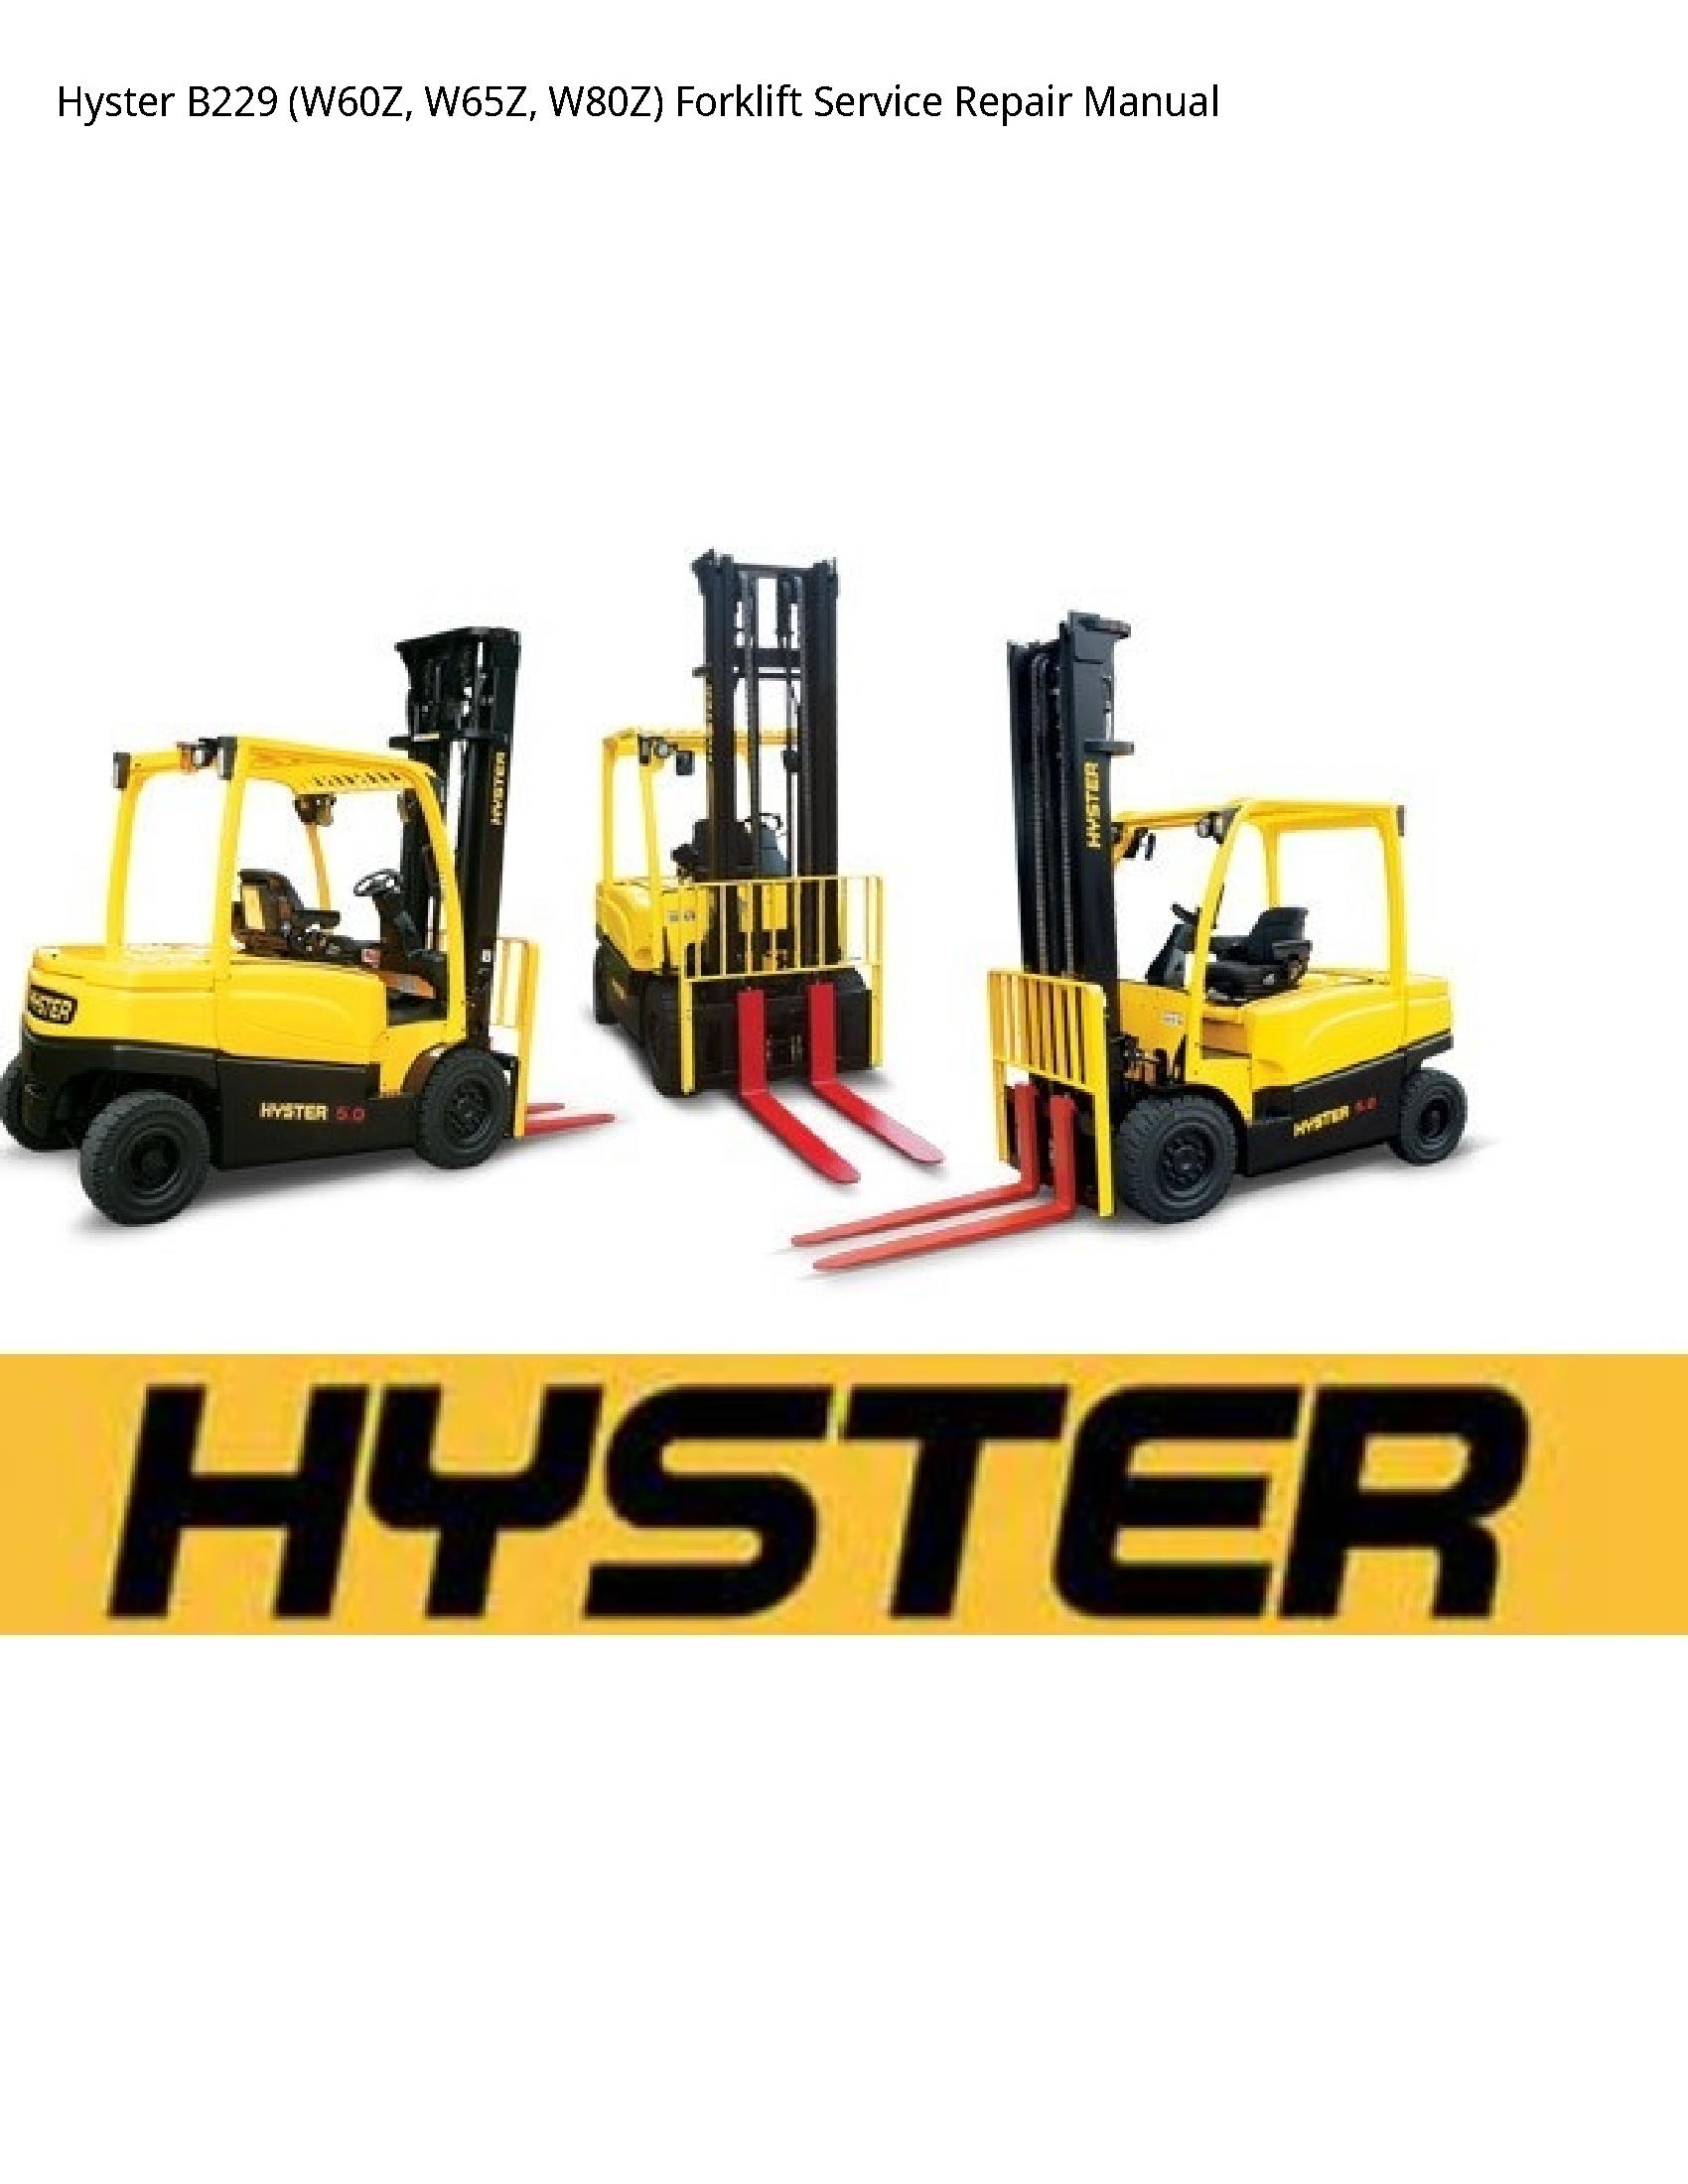 Hyster B229 Forklift manual